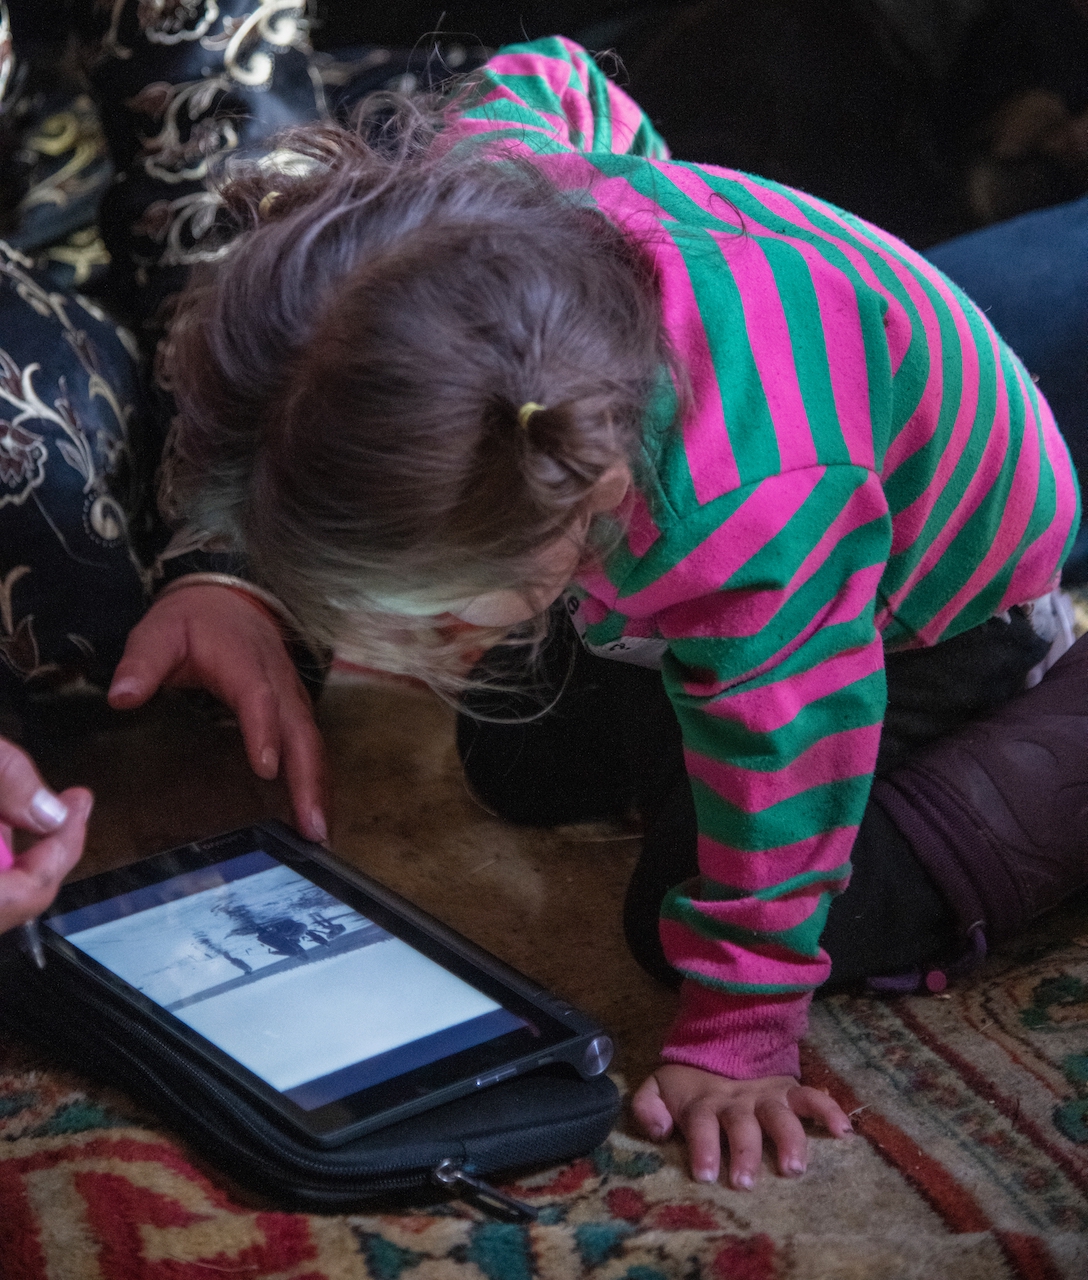 A little girl in pink and green crouches over a tablet.